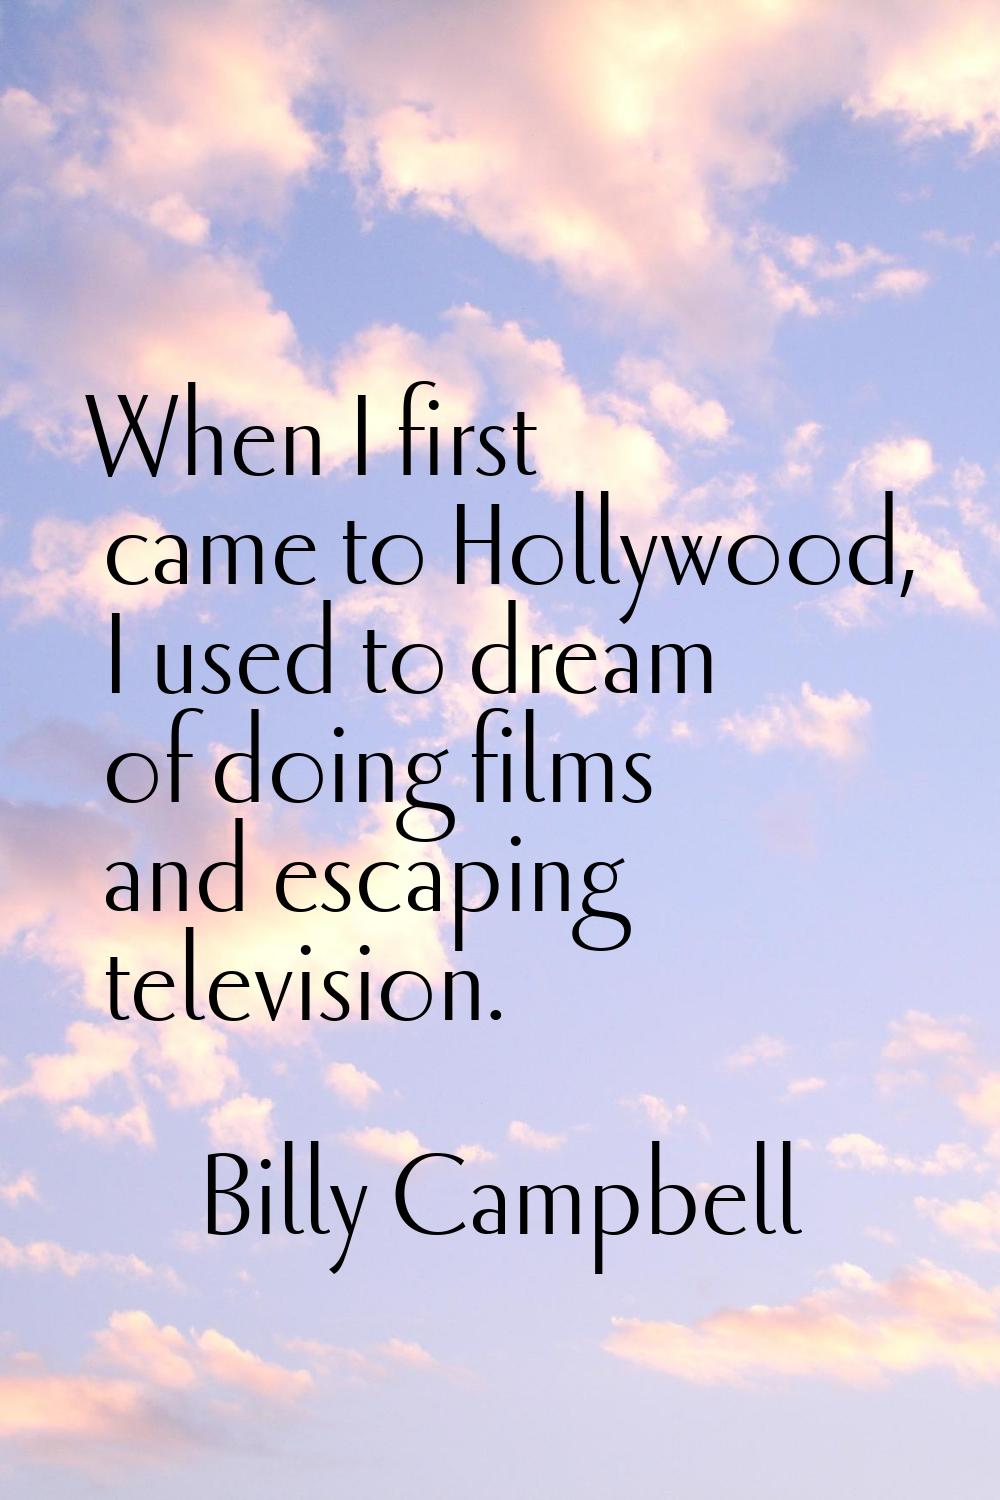 When I first came to Hollywood, I used to dream of doing films and escaping television.